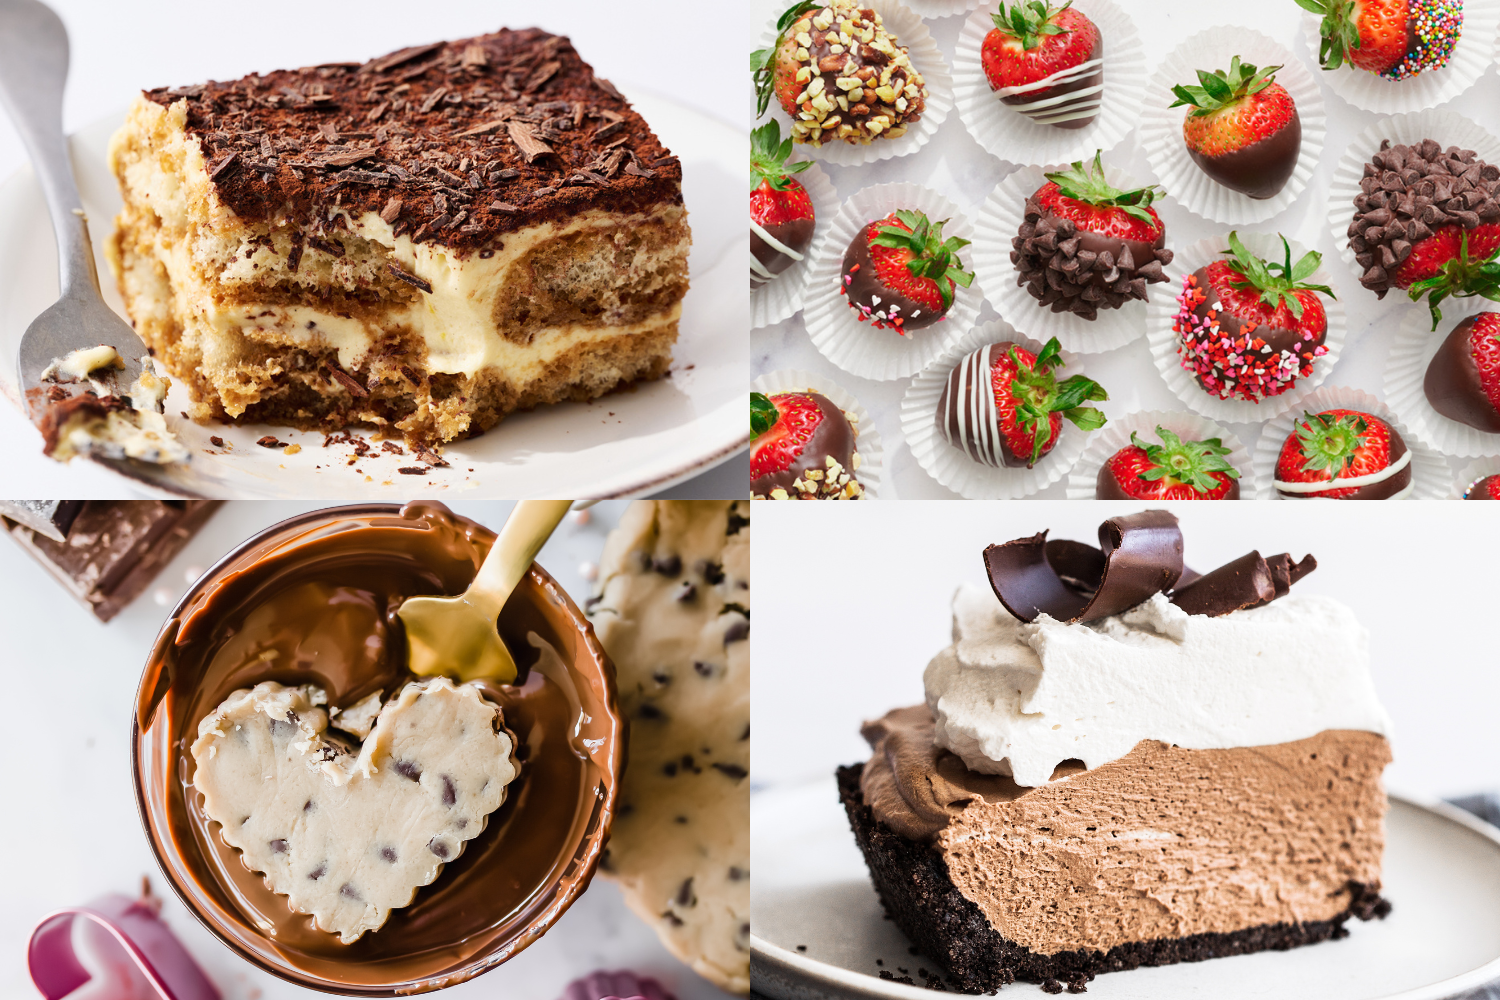 Valentine's Day dessert ideas: a slice of tiramisu, next to an assortment of chocolate-covered strawberries, then a cookie dough heart being covered in chocolate, and finally a slice of French Silk Pie with whipped cream and chocolate curls on top.